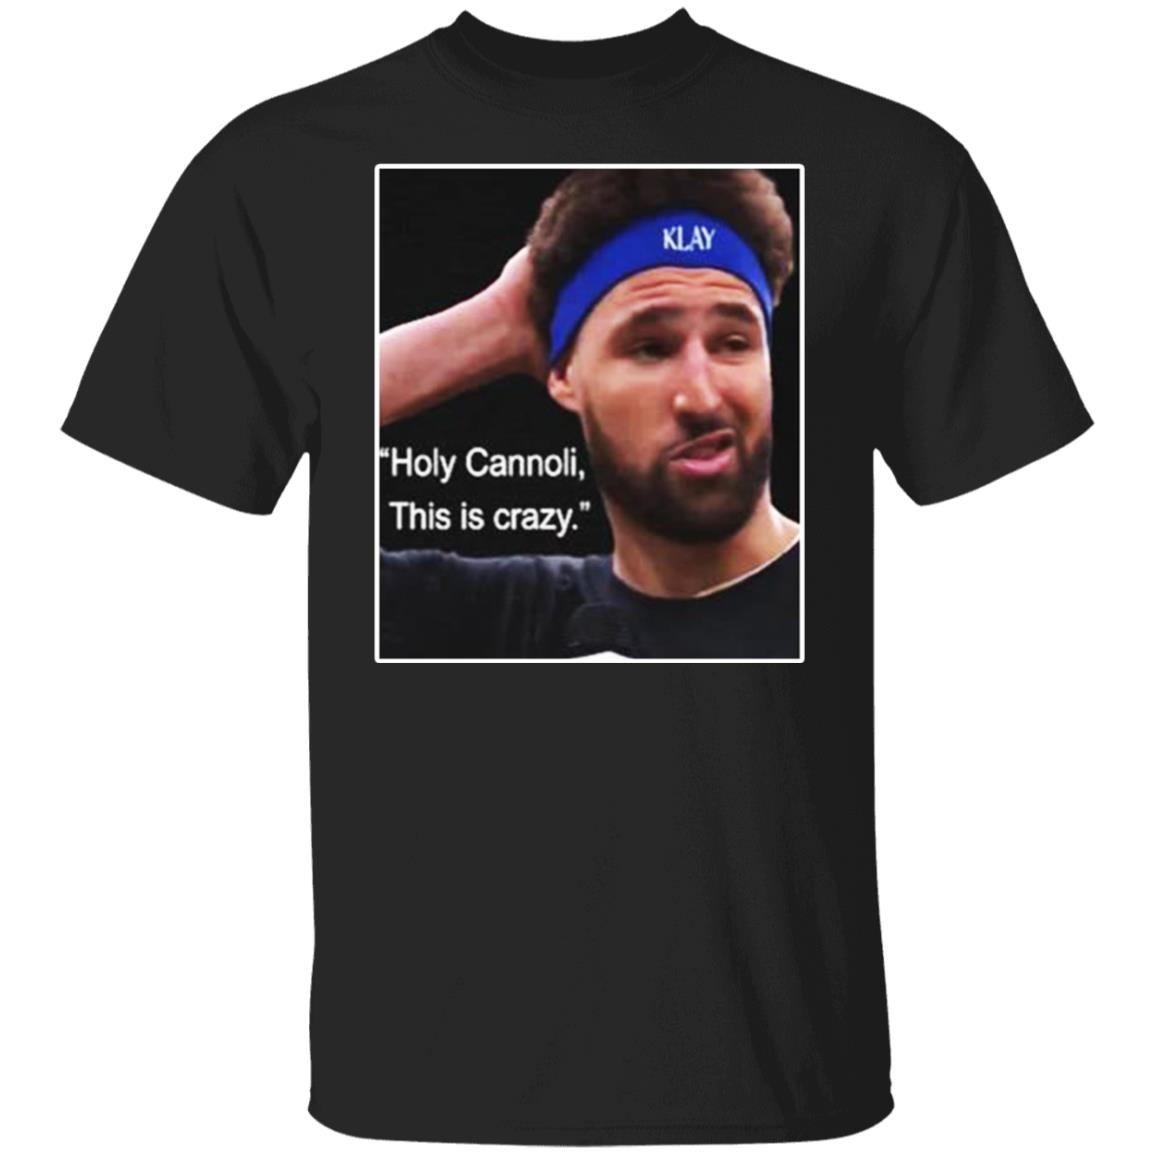 Klay Thompson Holy Cannoli This Is Crazy Shirt